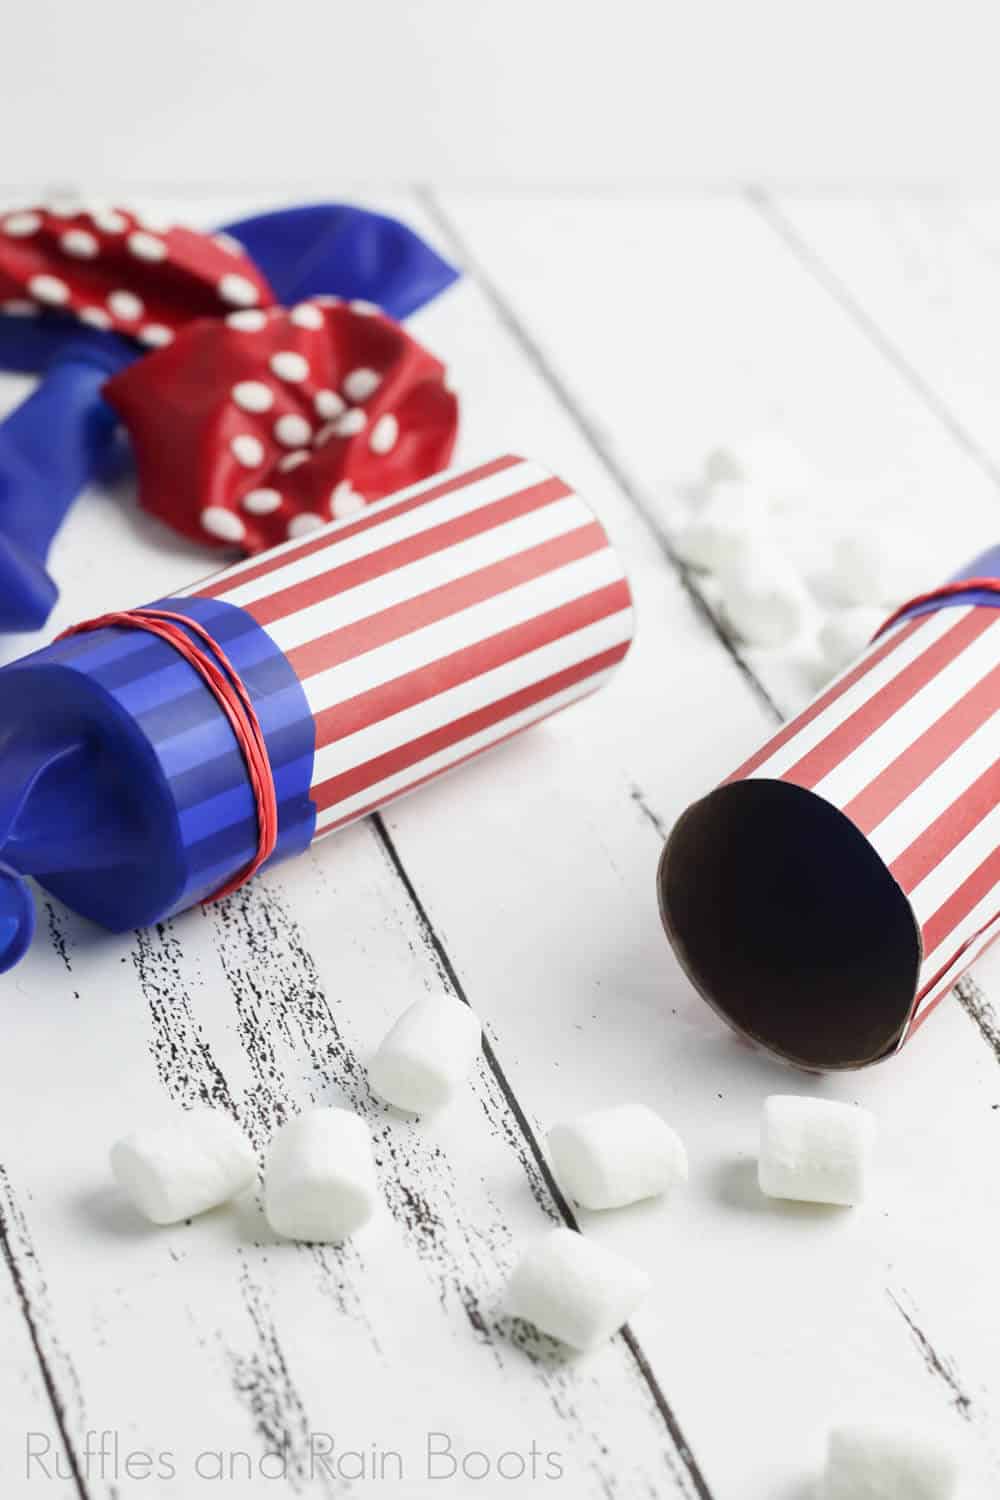 two marshmallow launchers on a wooden board as independence day party ideas for kids